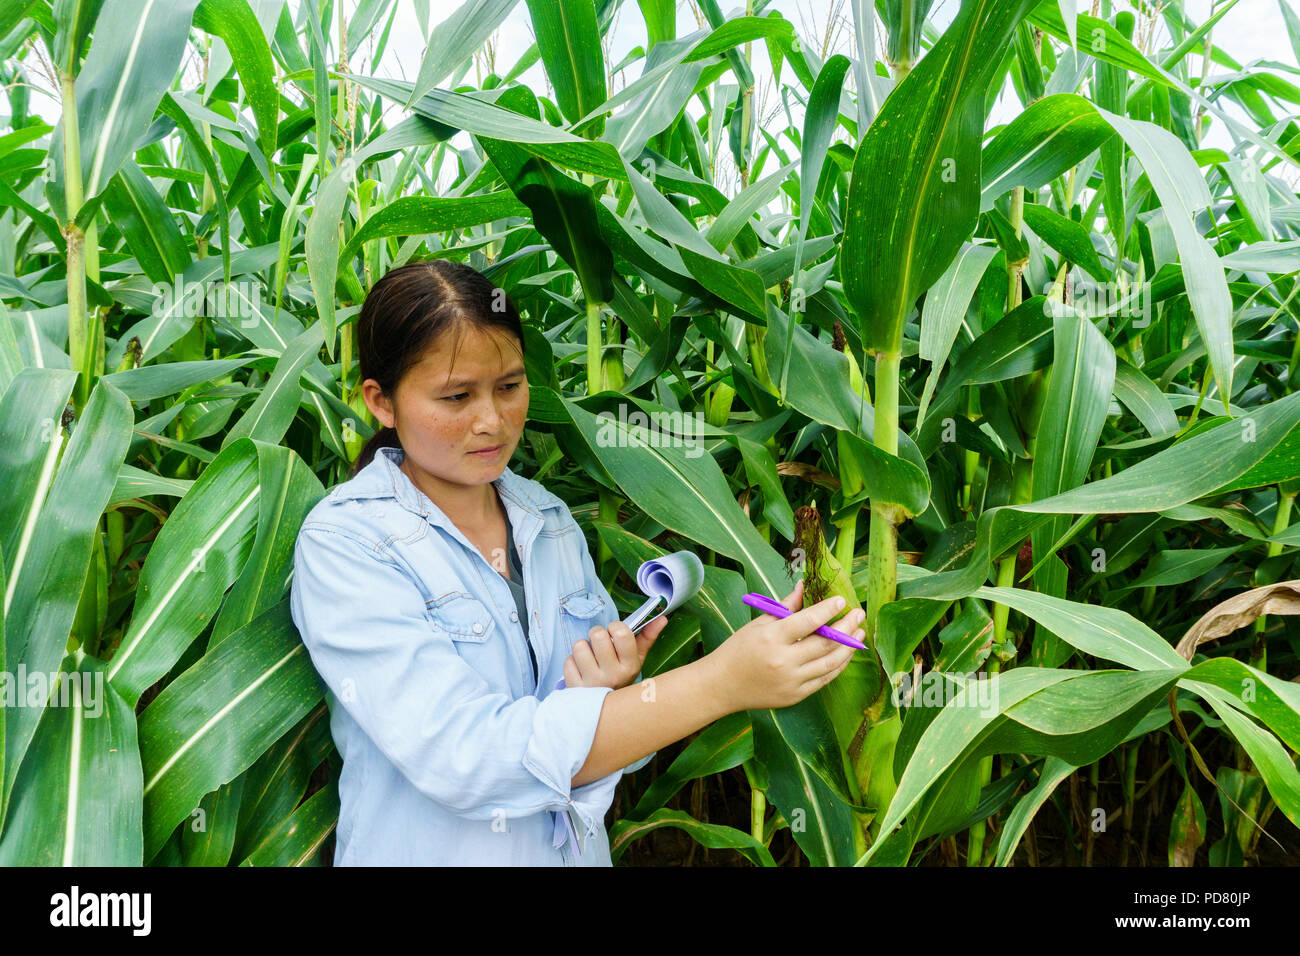 A young girl inspects the corn and notes the observations found. Stock Photo